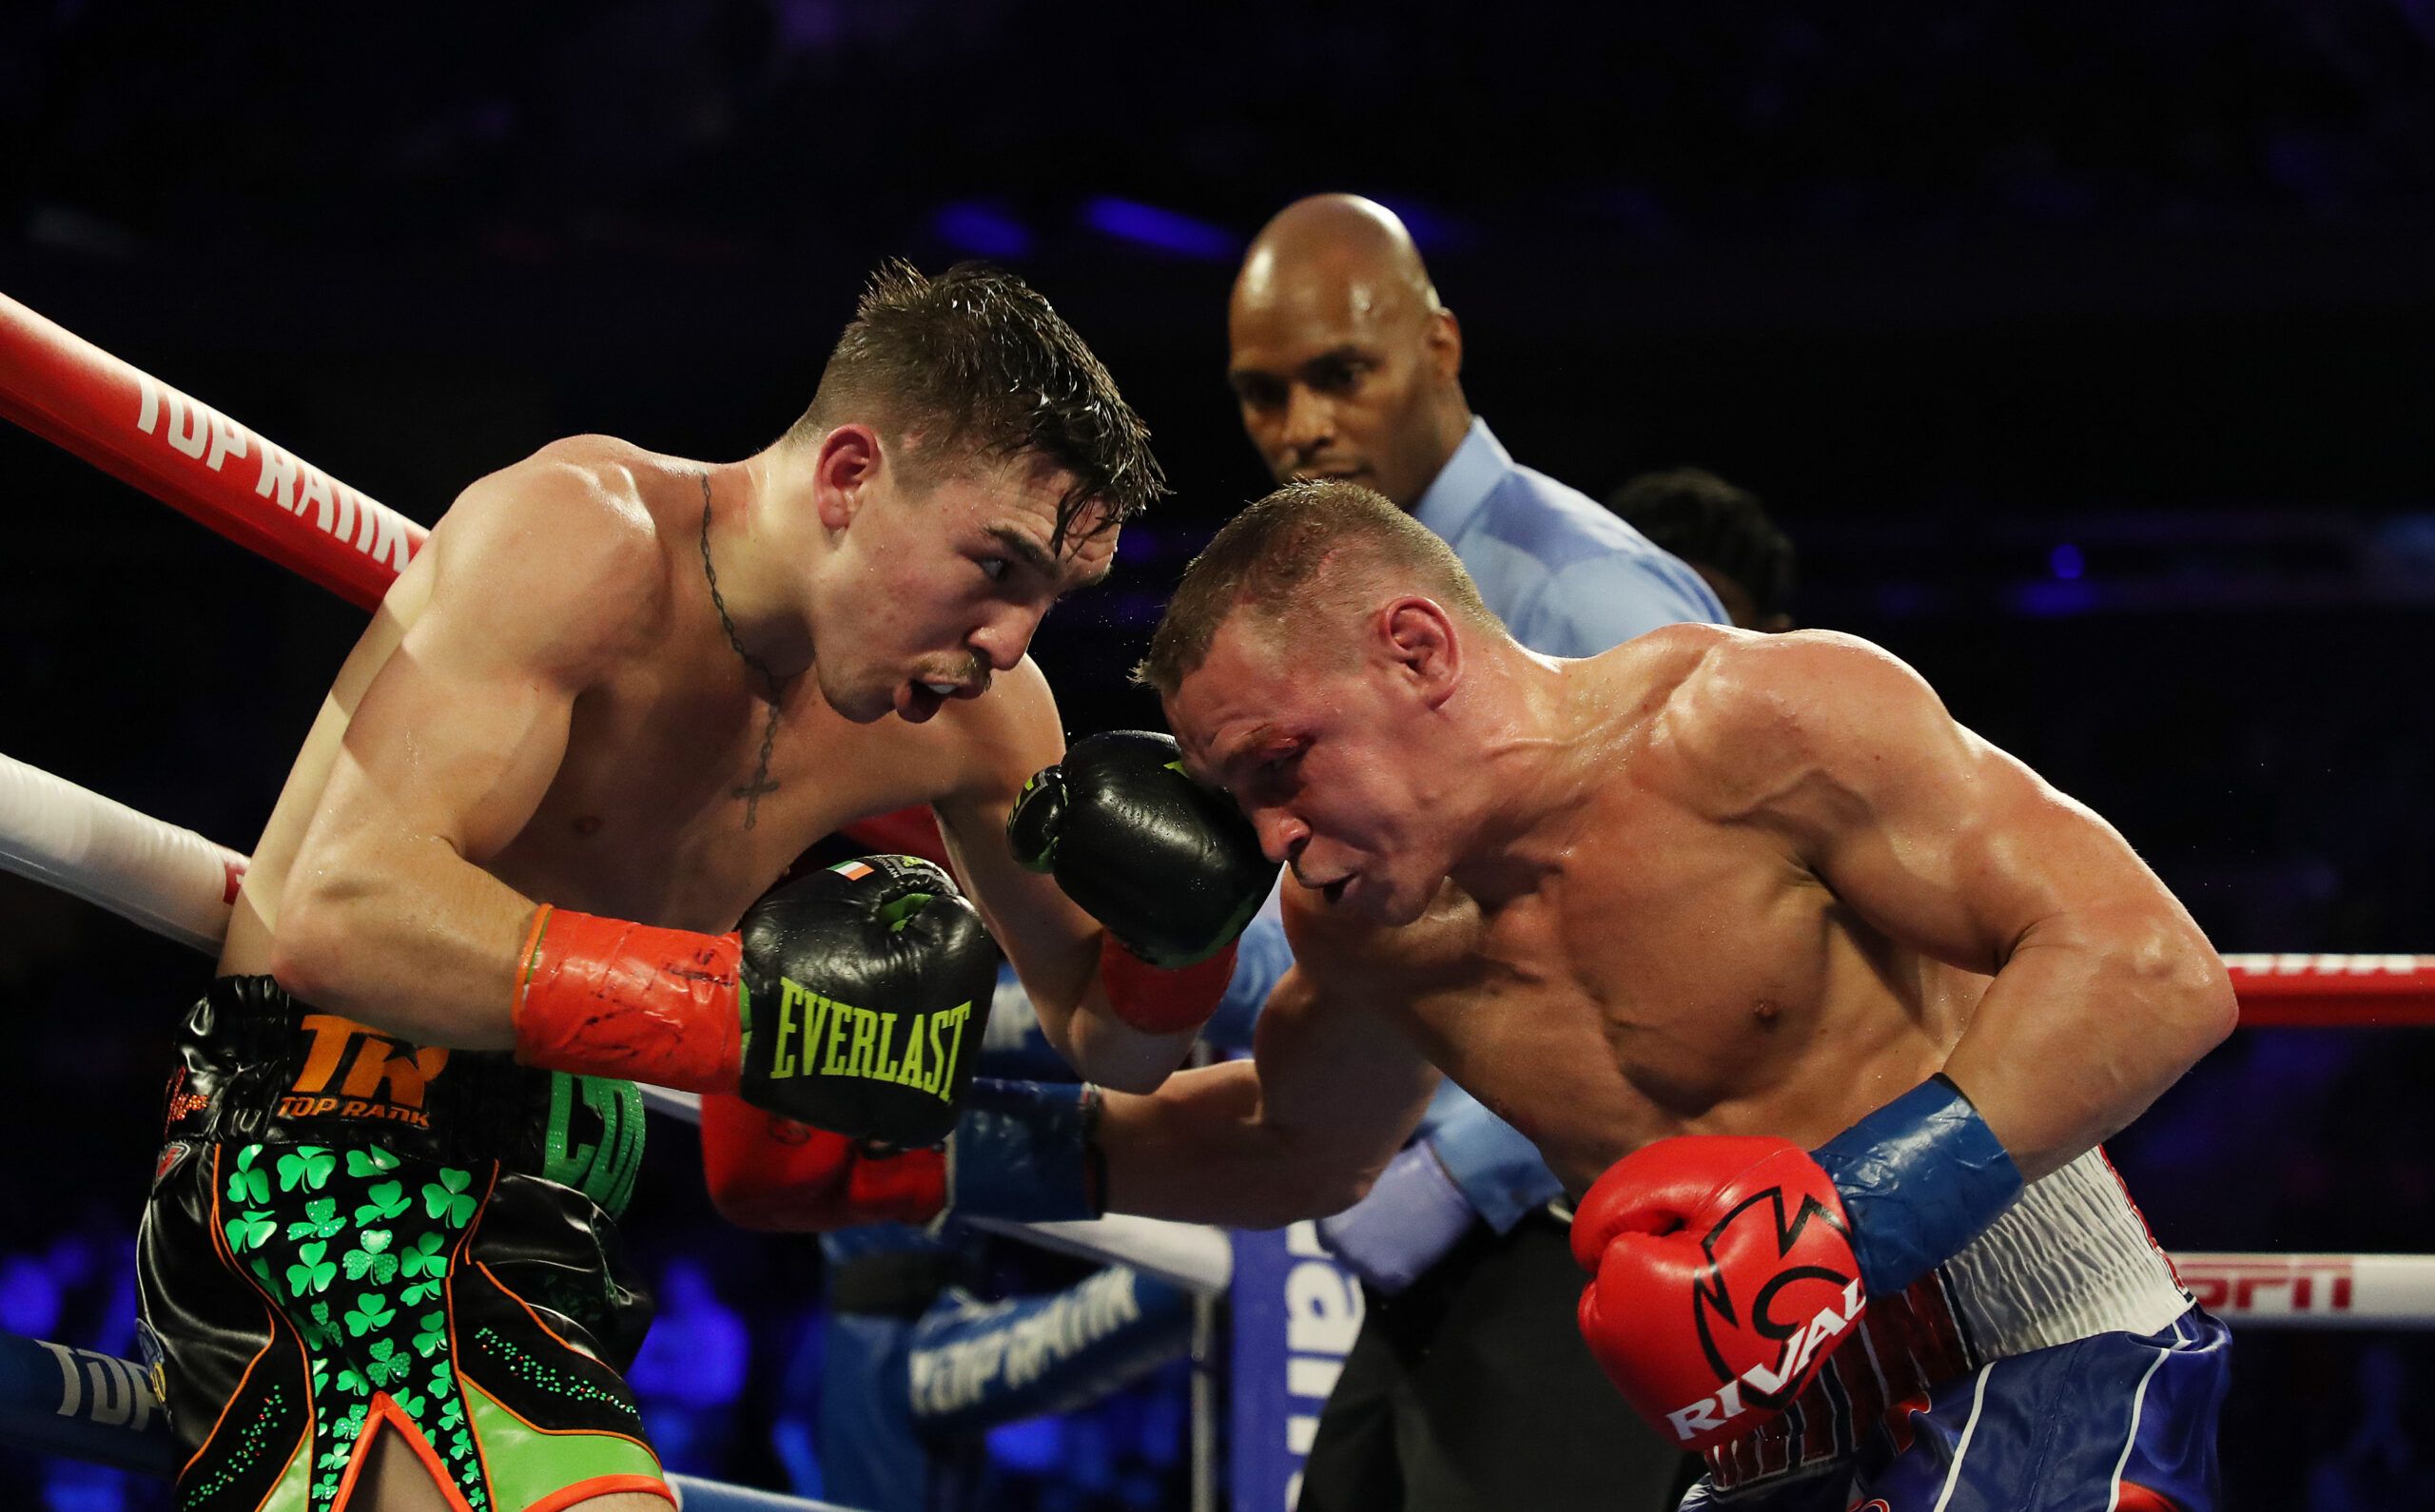 Michael Conlan vs Miguel Marriaga Betting Odds What are they?